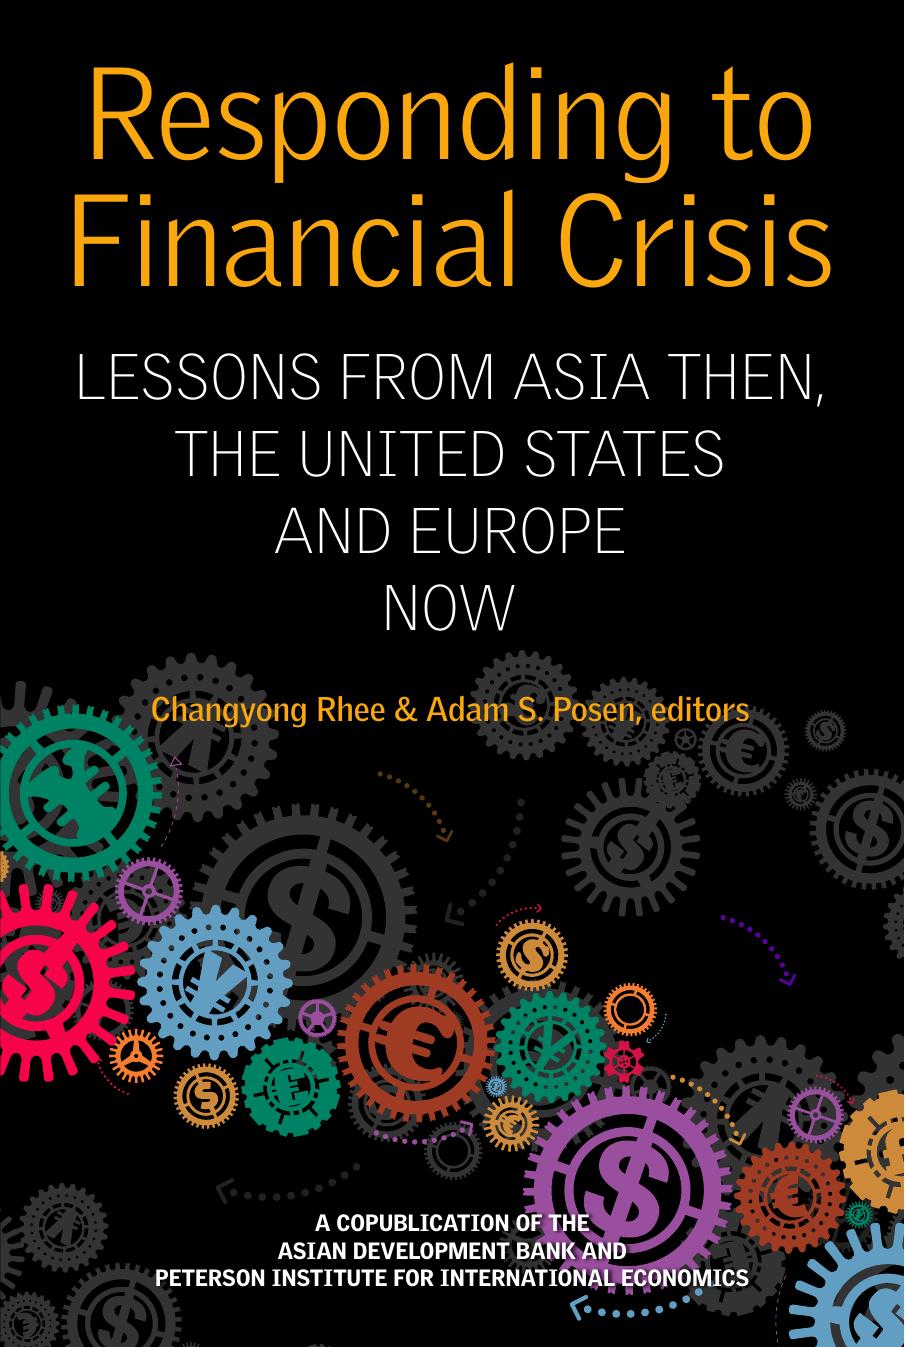 Responding to Financial Crisis: Lessons from Asia then, the United States and Europe now by Adam S. Posen; Rhee Changyong